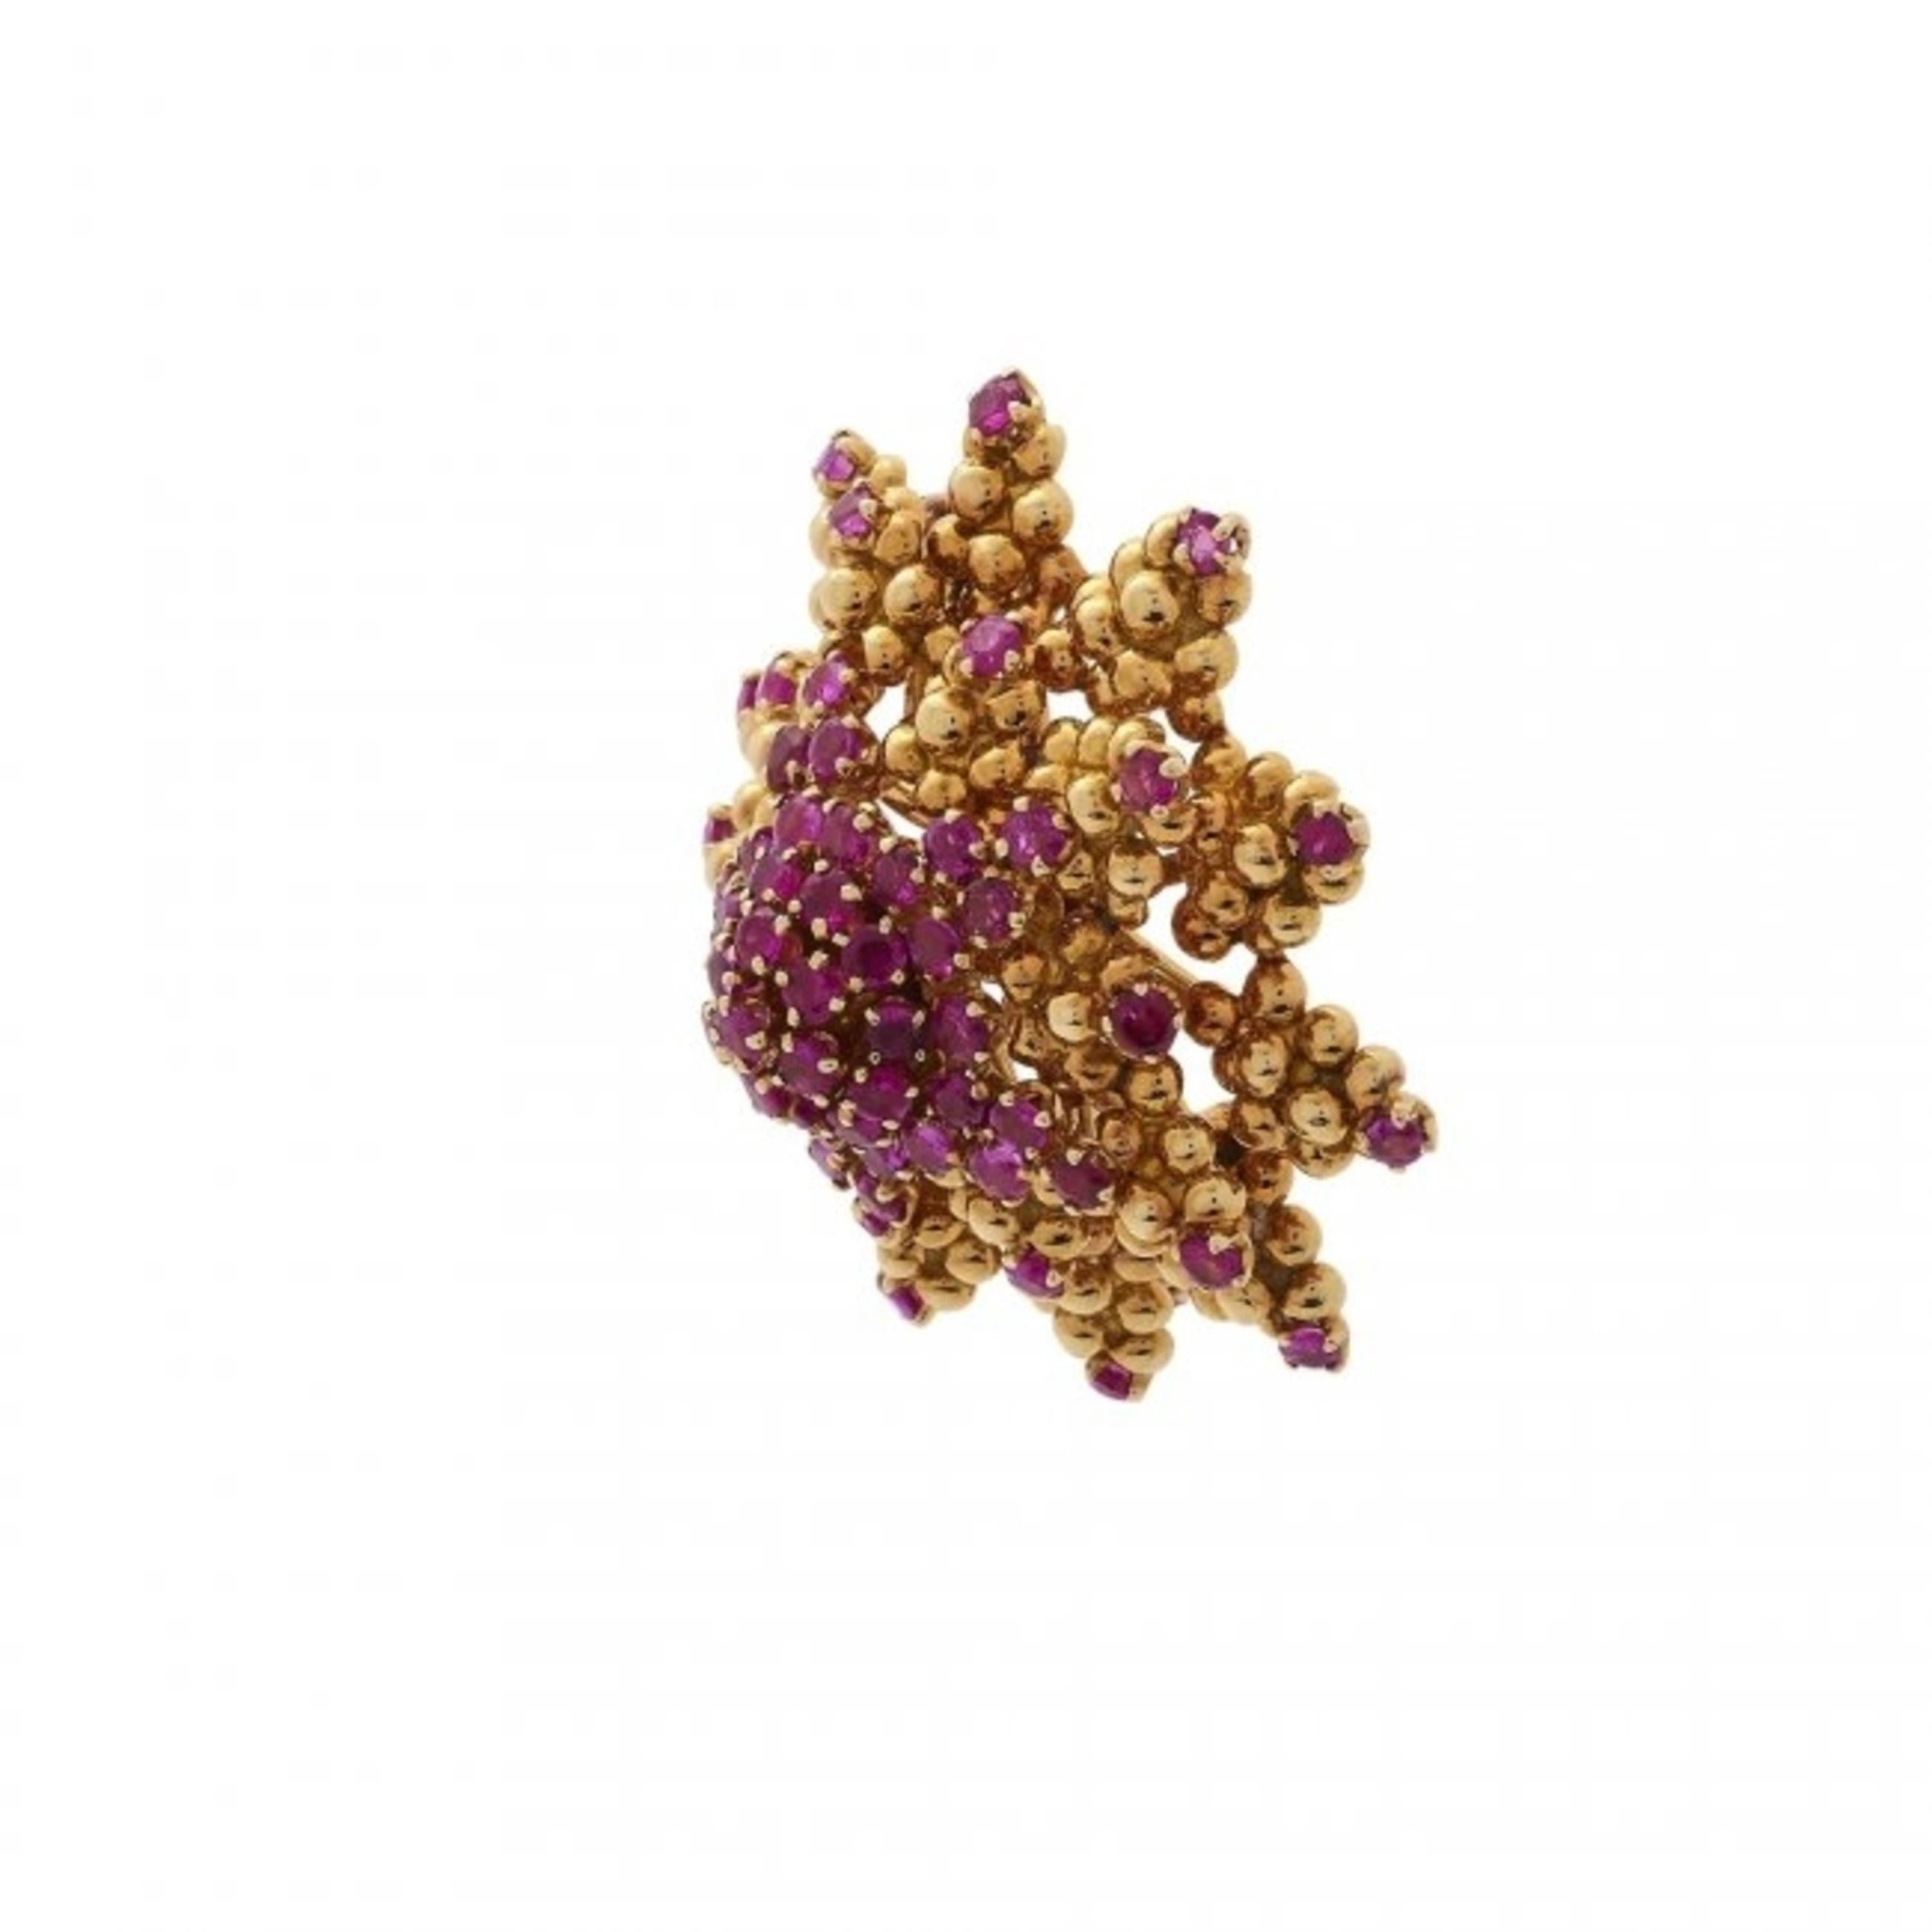 Ruby and Diamond Brooch, possibly  Tiffany & Co., 
Designed as a starfish, set with variously shaped rubies, weighing approximately 4.5 carat, mounted in 18 karat yellow gold, 1.78 inches